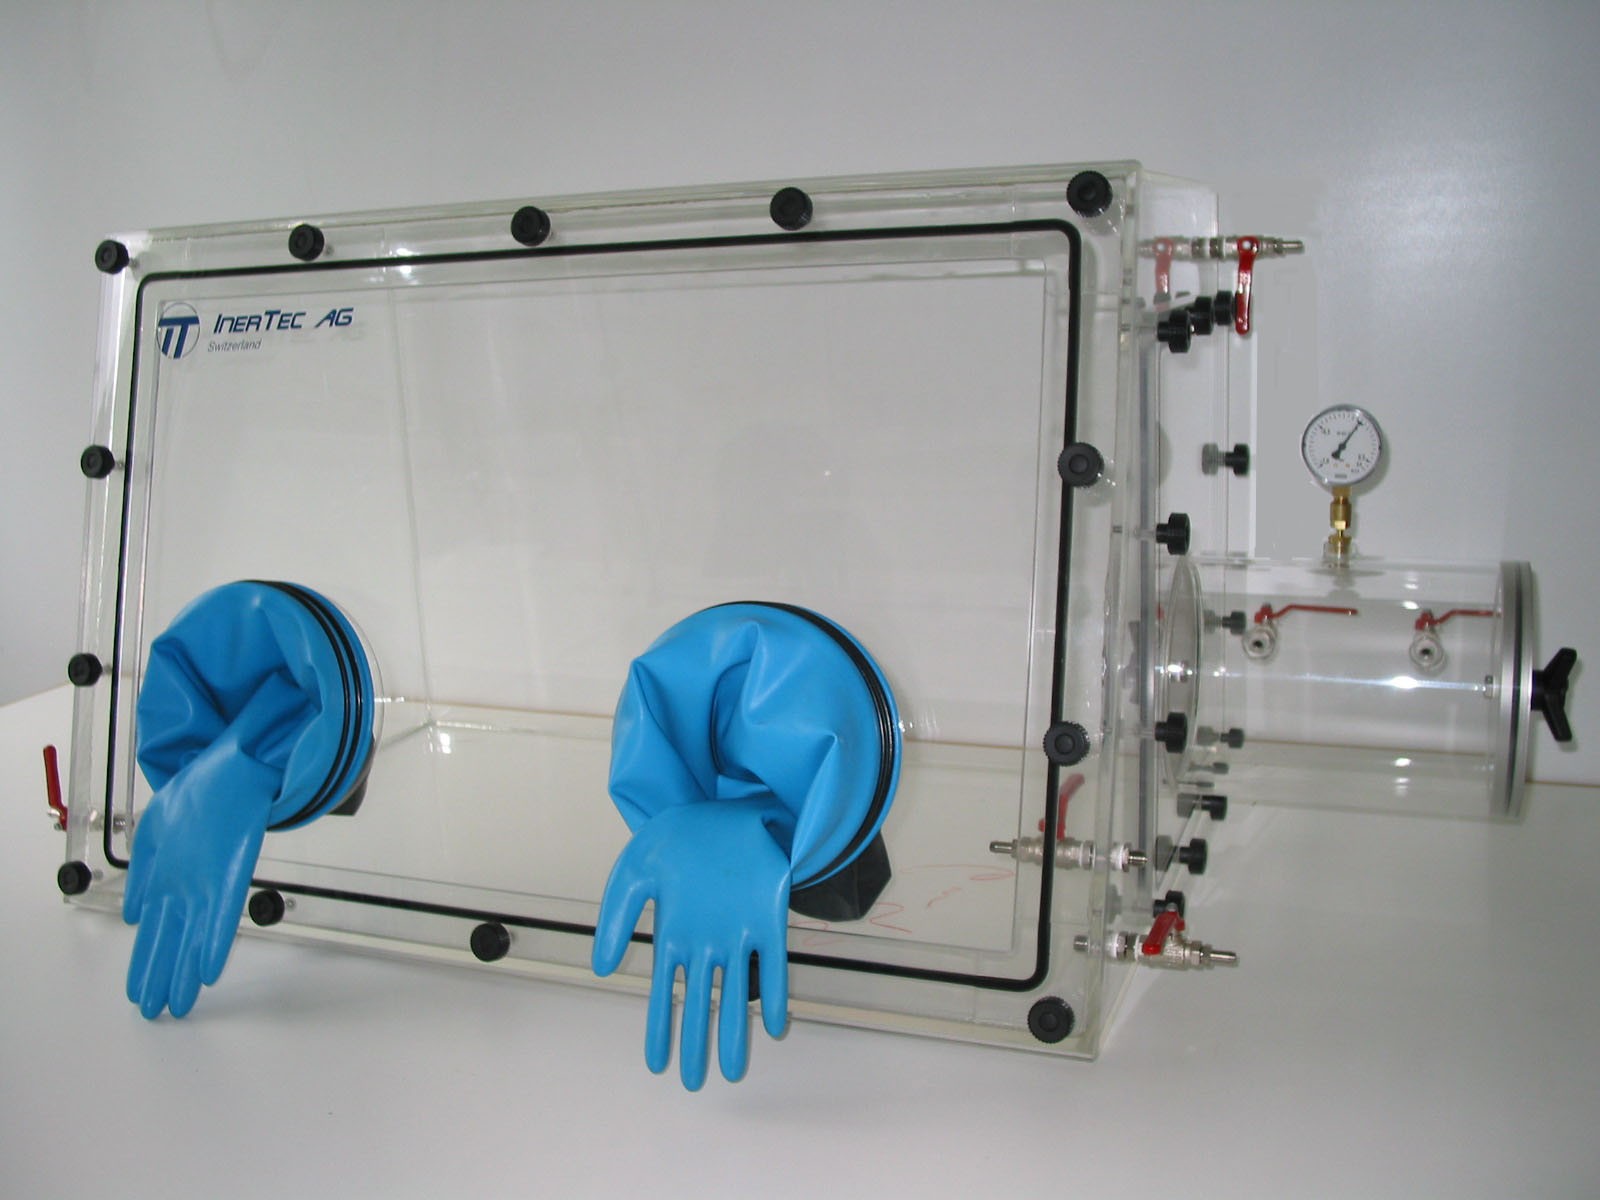 Glovebox made of acrylic&gt; Gas filling: automatic flushing with pressure control, front design: swivels upwards, side design: removable flange Control: humidity controller and oxygen display with data logger